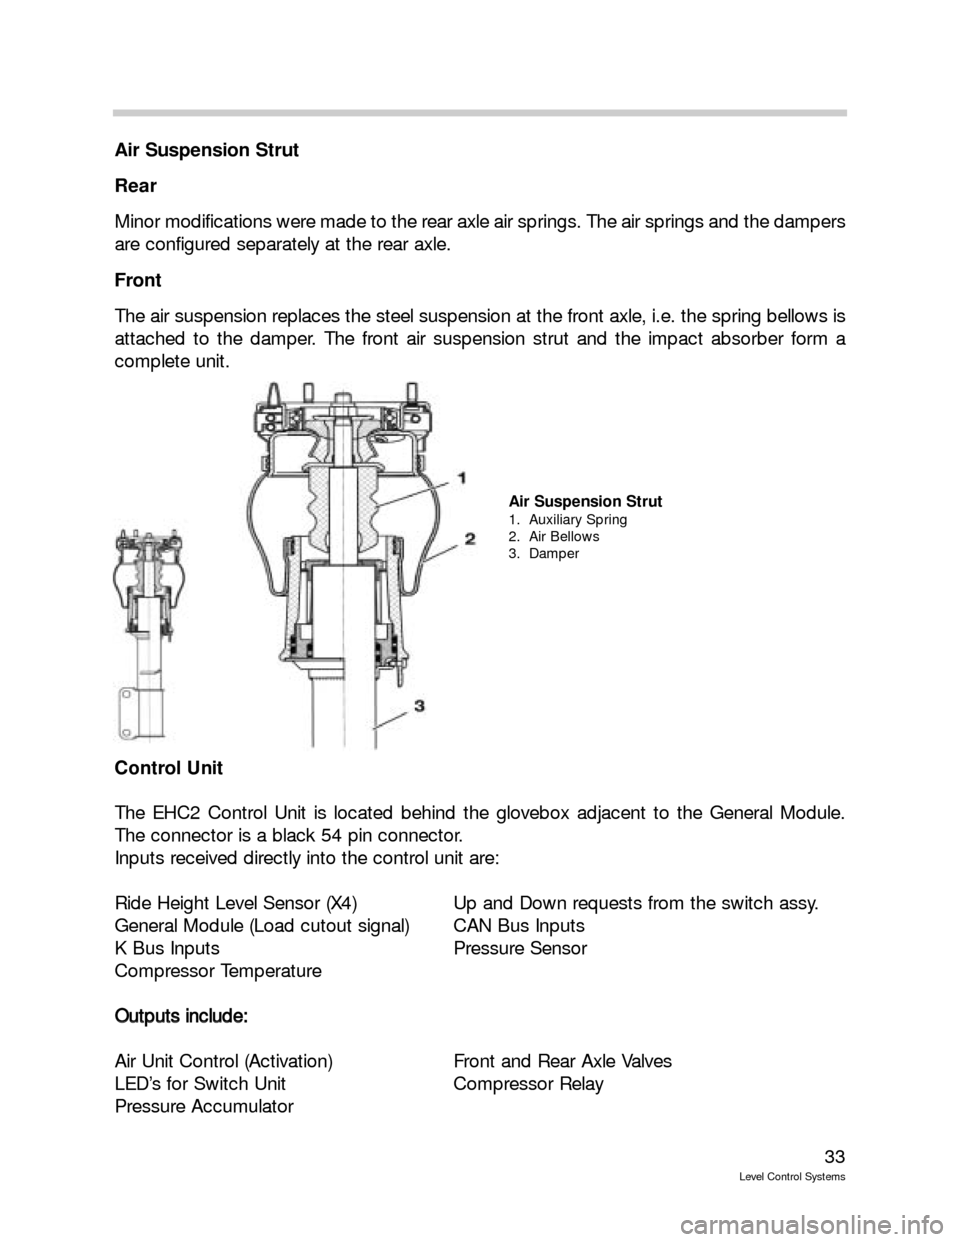 BMW X5 2000 E53 Level Control System Manual 33
Level Control Systems
Air Suspension Strut
Rear 
Minor modifications were made to the rear axle air springs. The air springs and the dampers
are configured separately at the rear axle.
Front
The ai